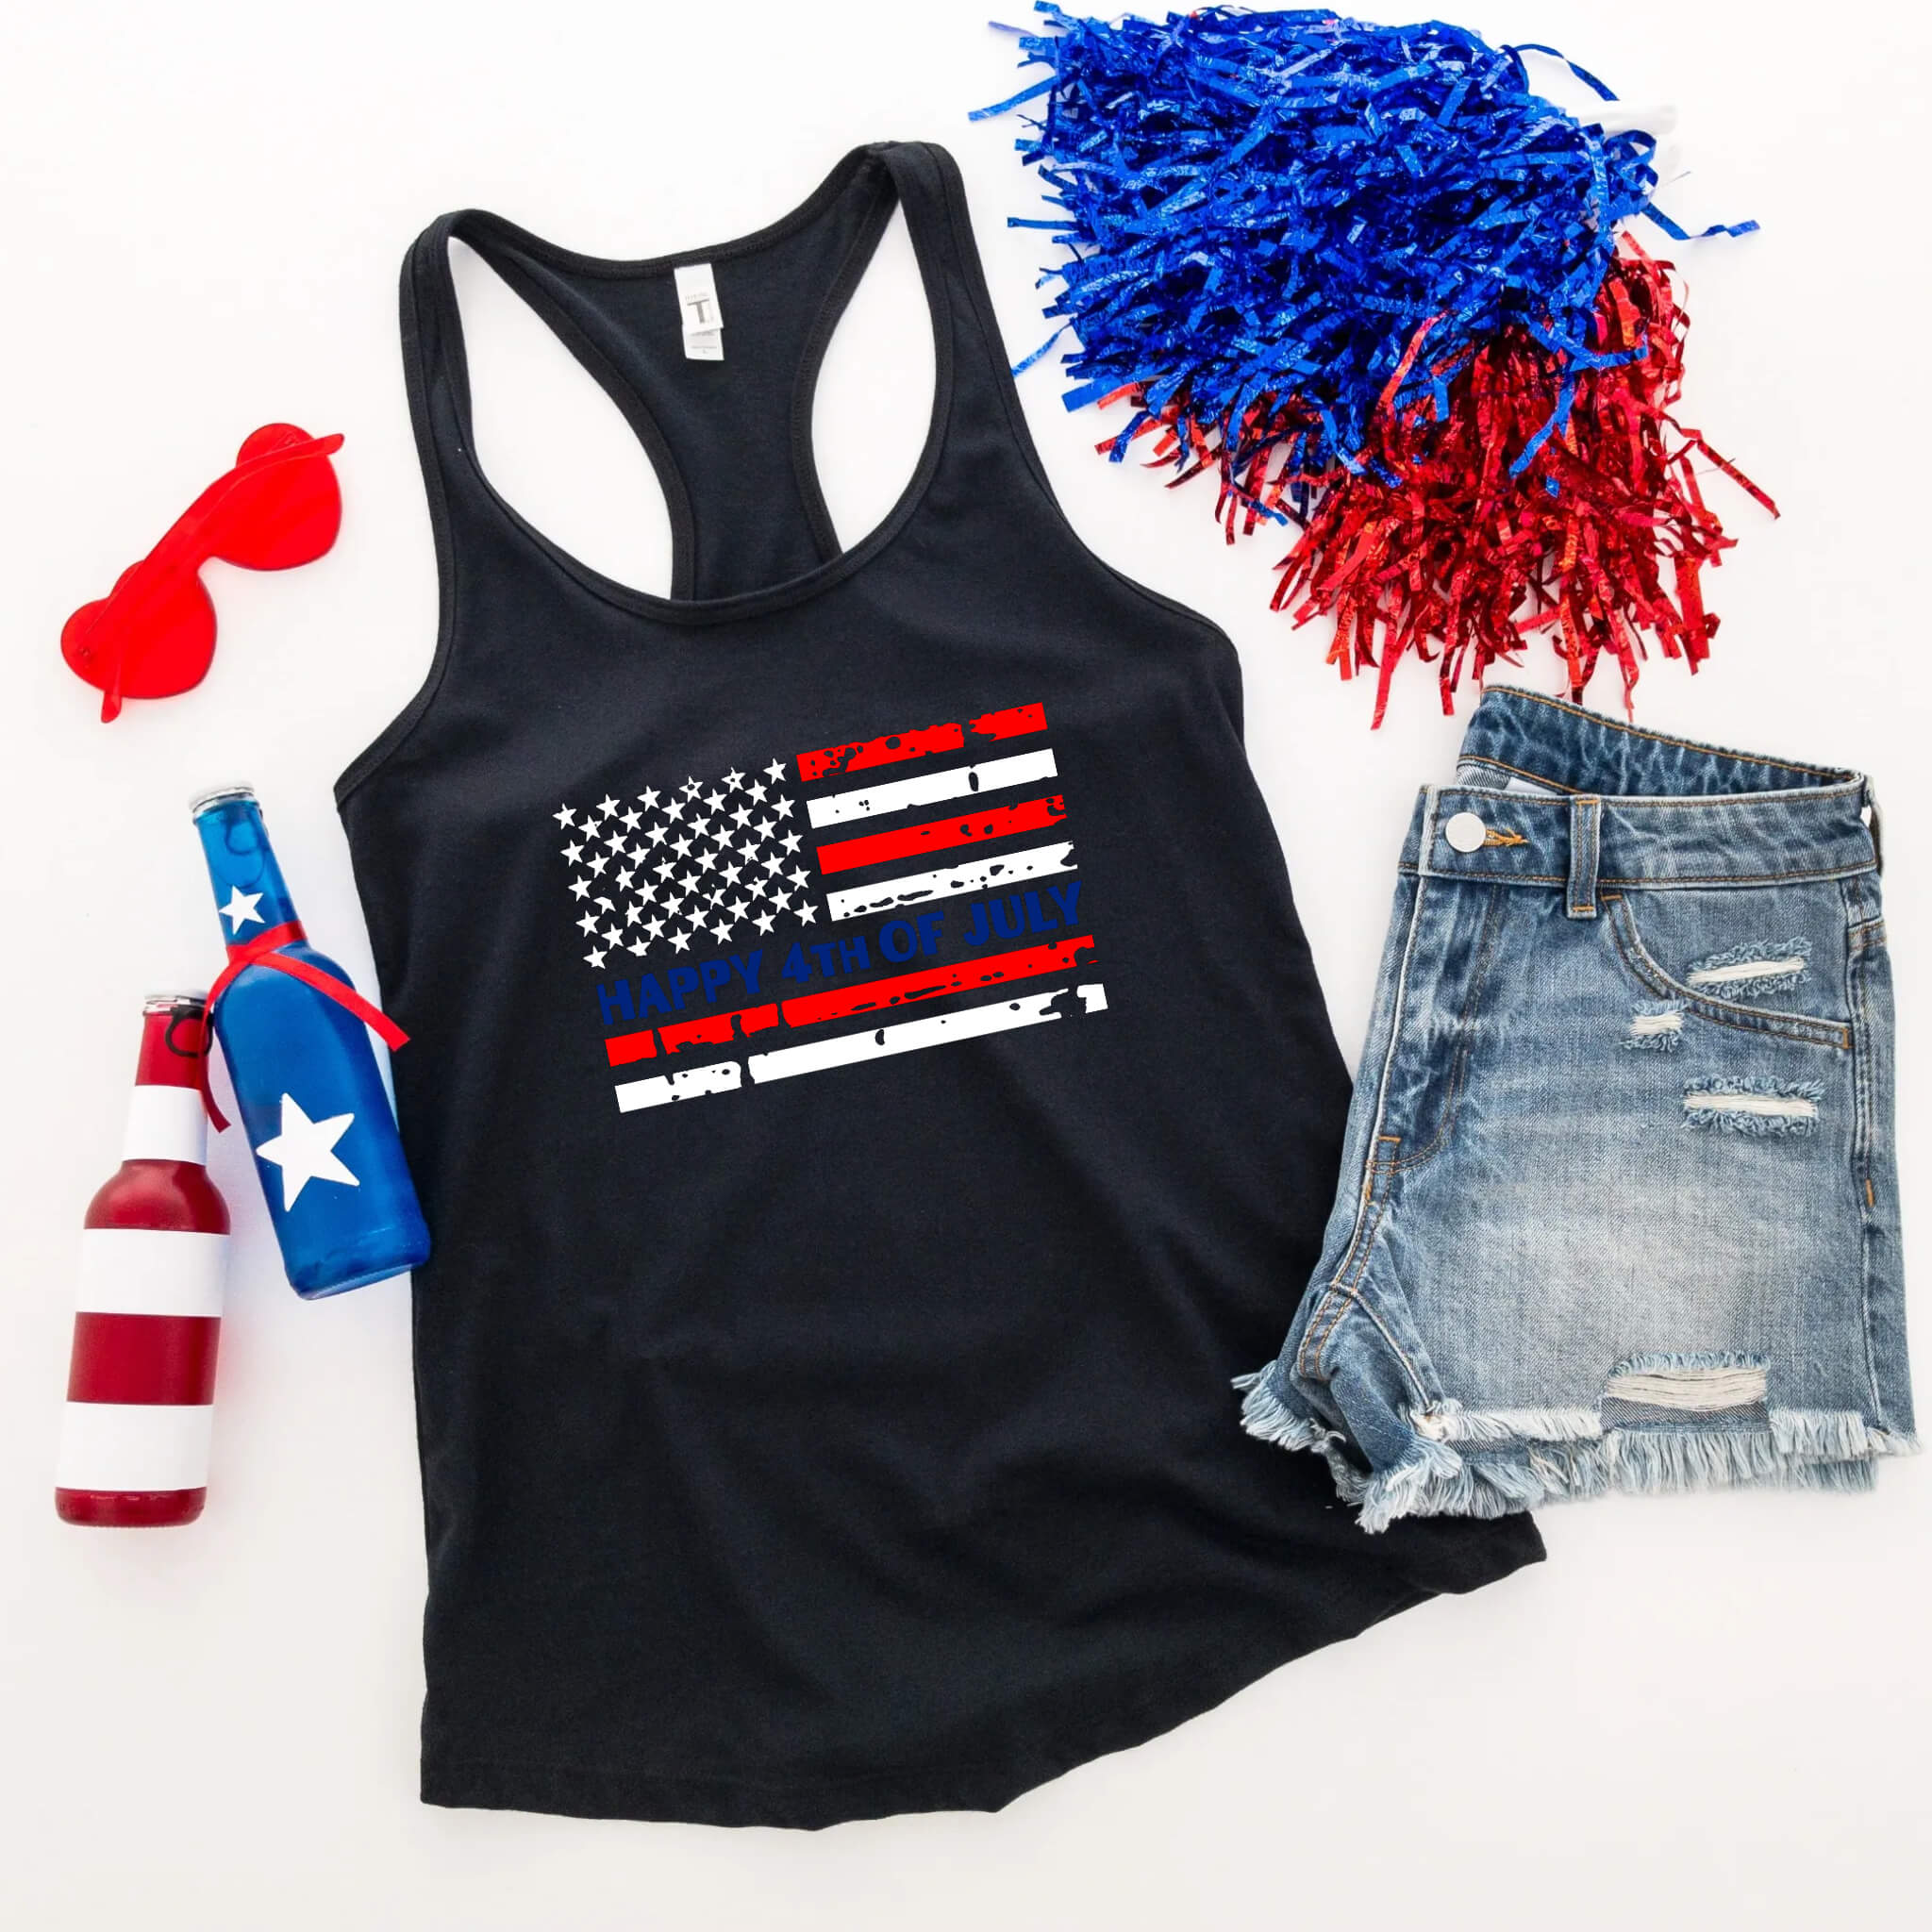 4th of July - Happy 4th of July Patriotic Graphic Print Women’s T-Shirt / Tank Top